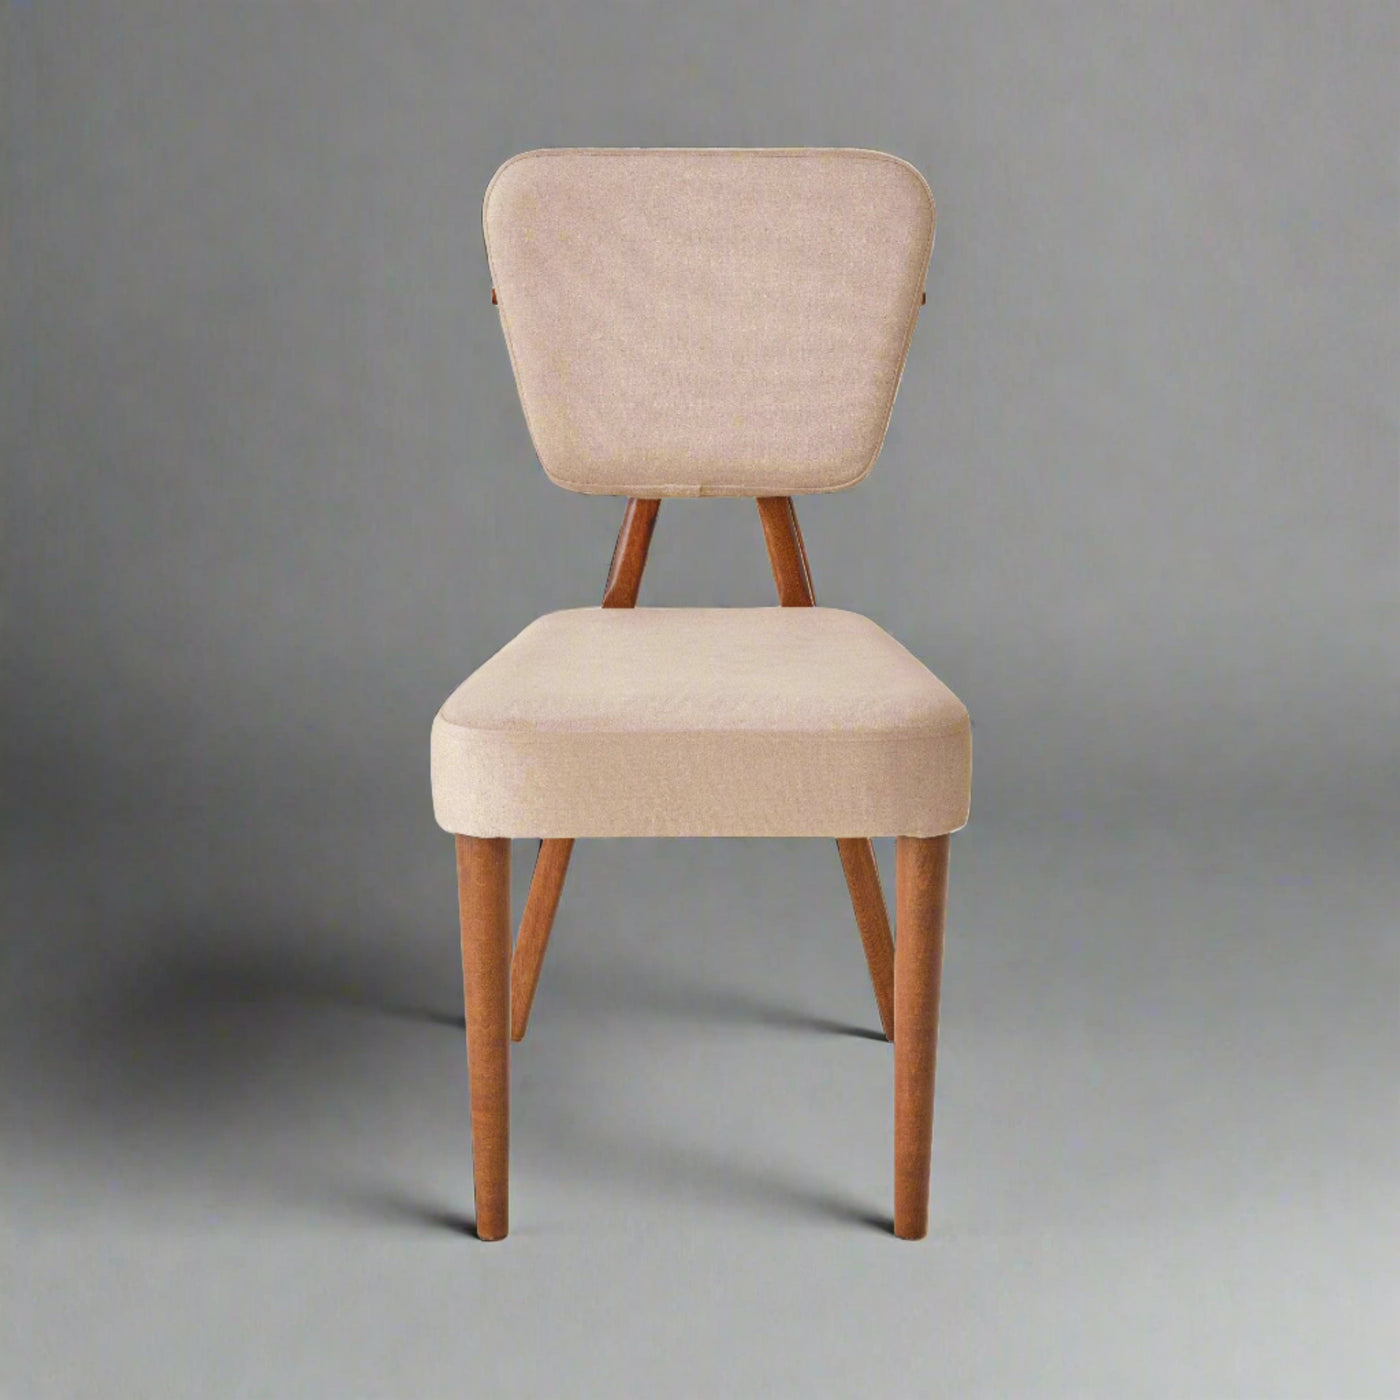 Piet Set of 4 Dining Chairs, Cream Dining Chairs & Benches sazy.com